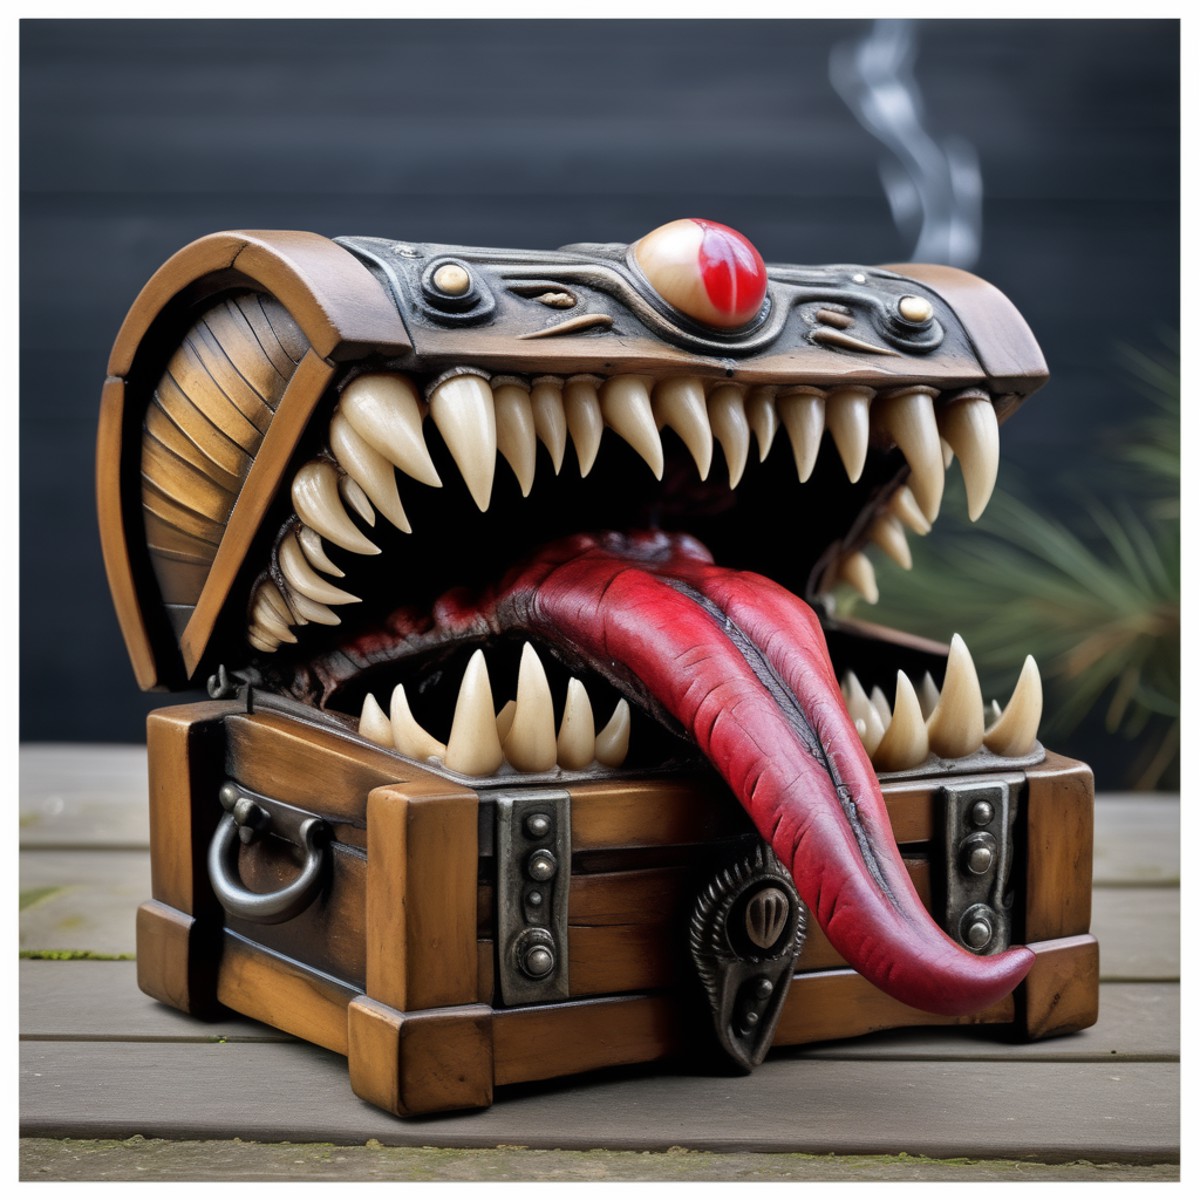 A vintage wooden treasure chest monster with a large tongue and teeth, medium: hyper-realistic photography, style: inspire...